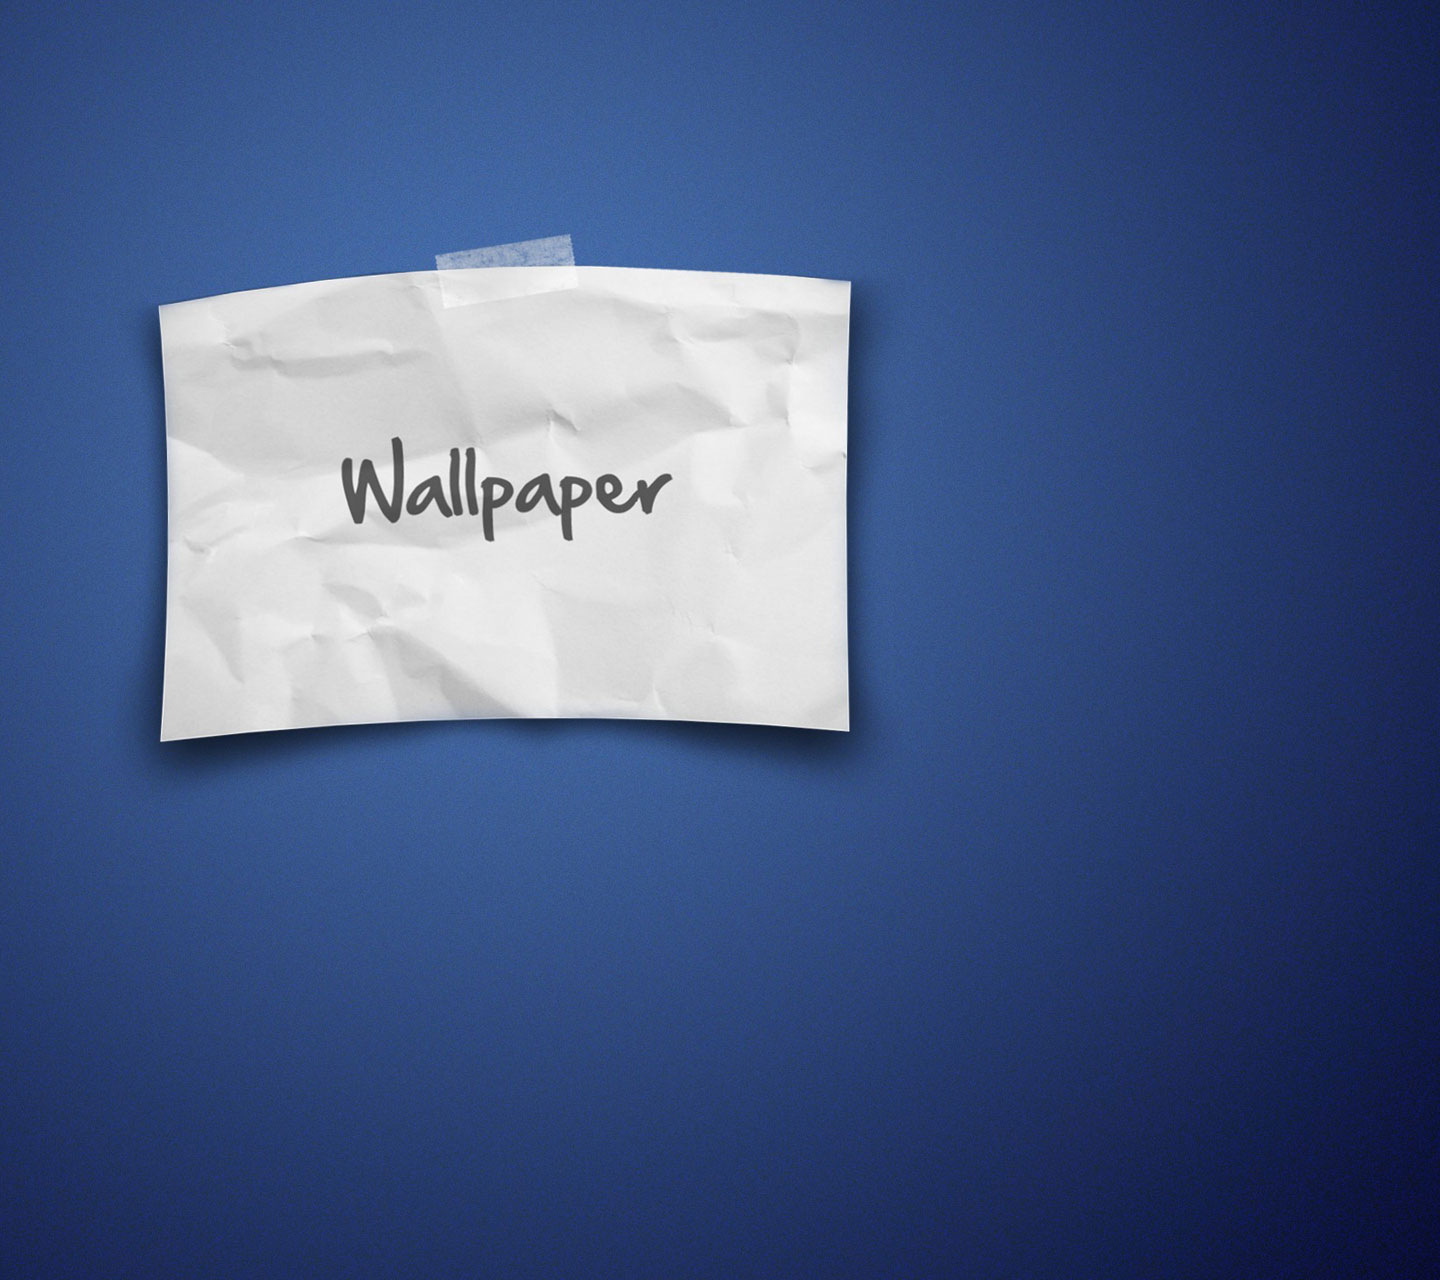 animated wallpapers for mobile samsung champ,text,blue,font,sky,logo